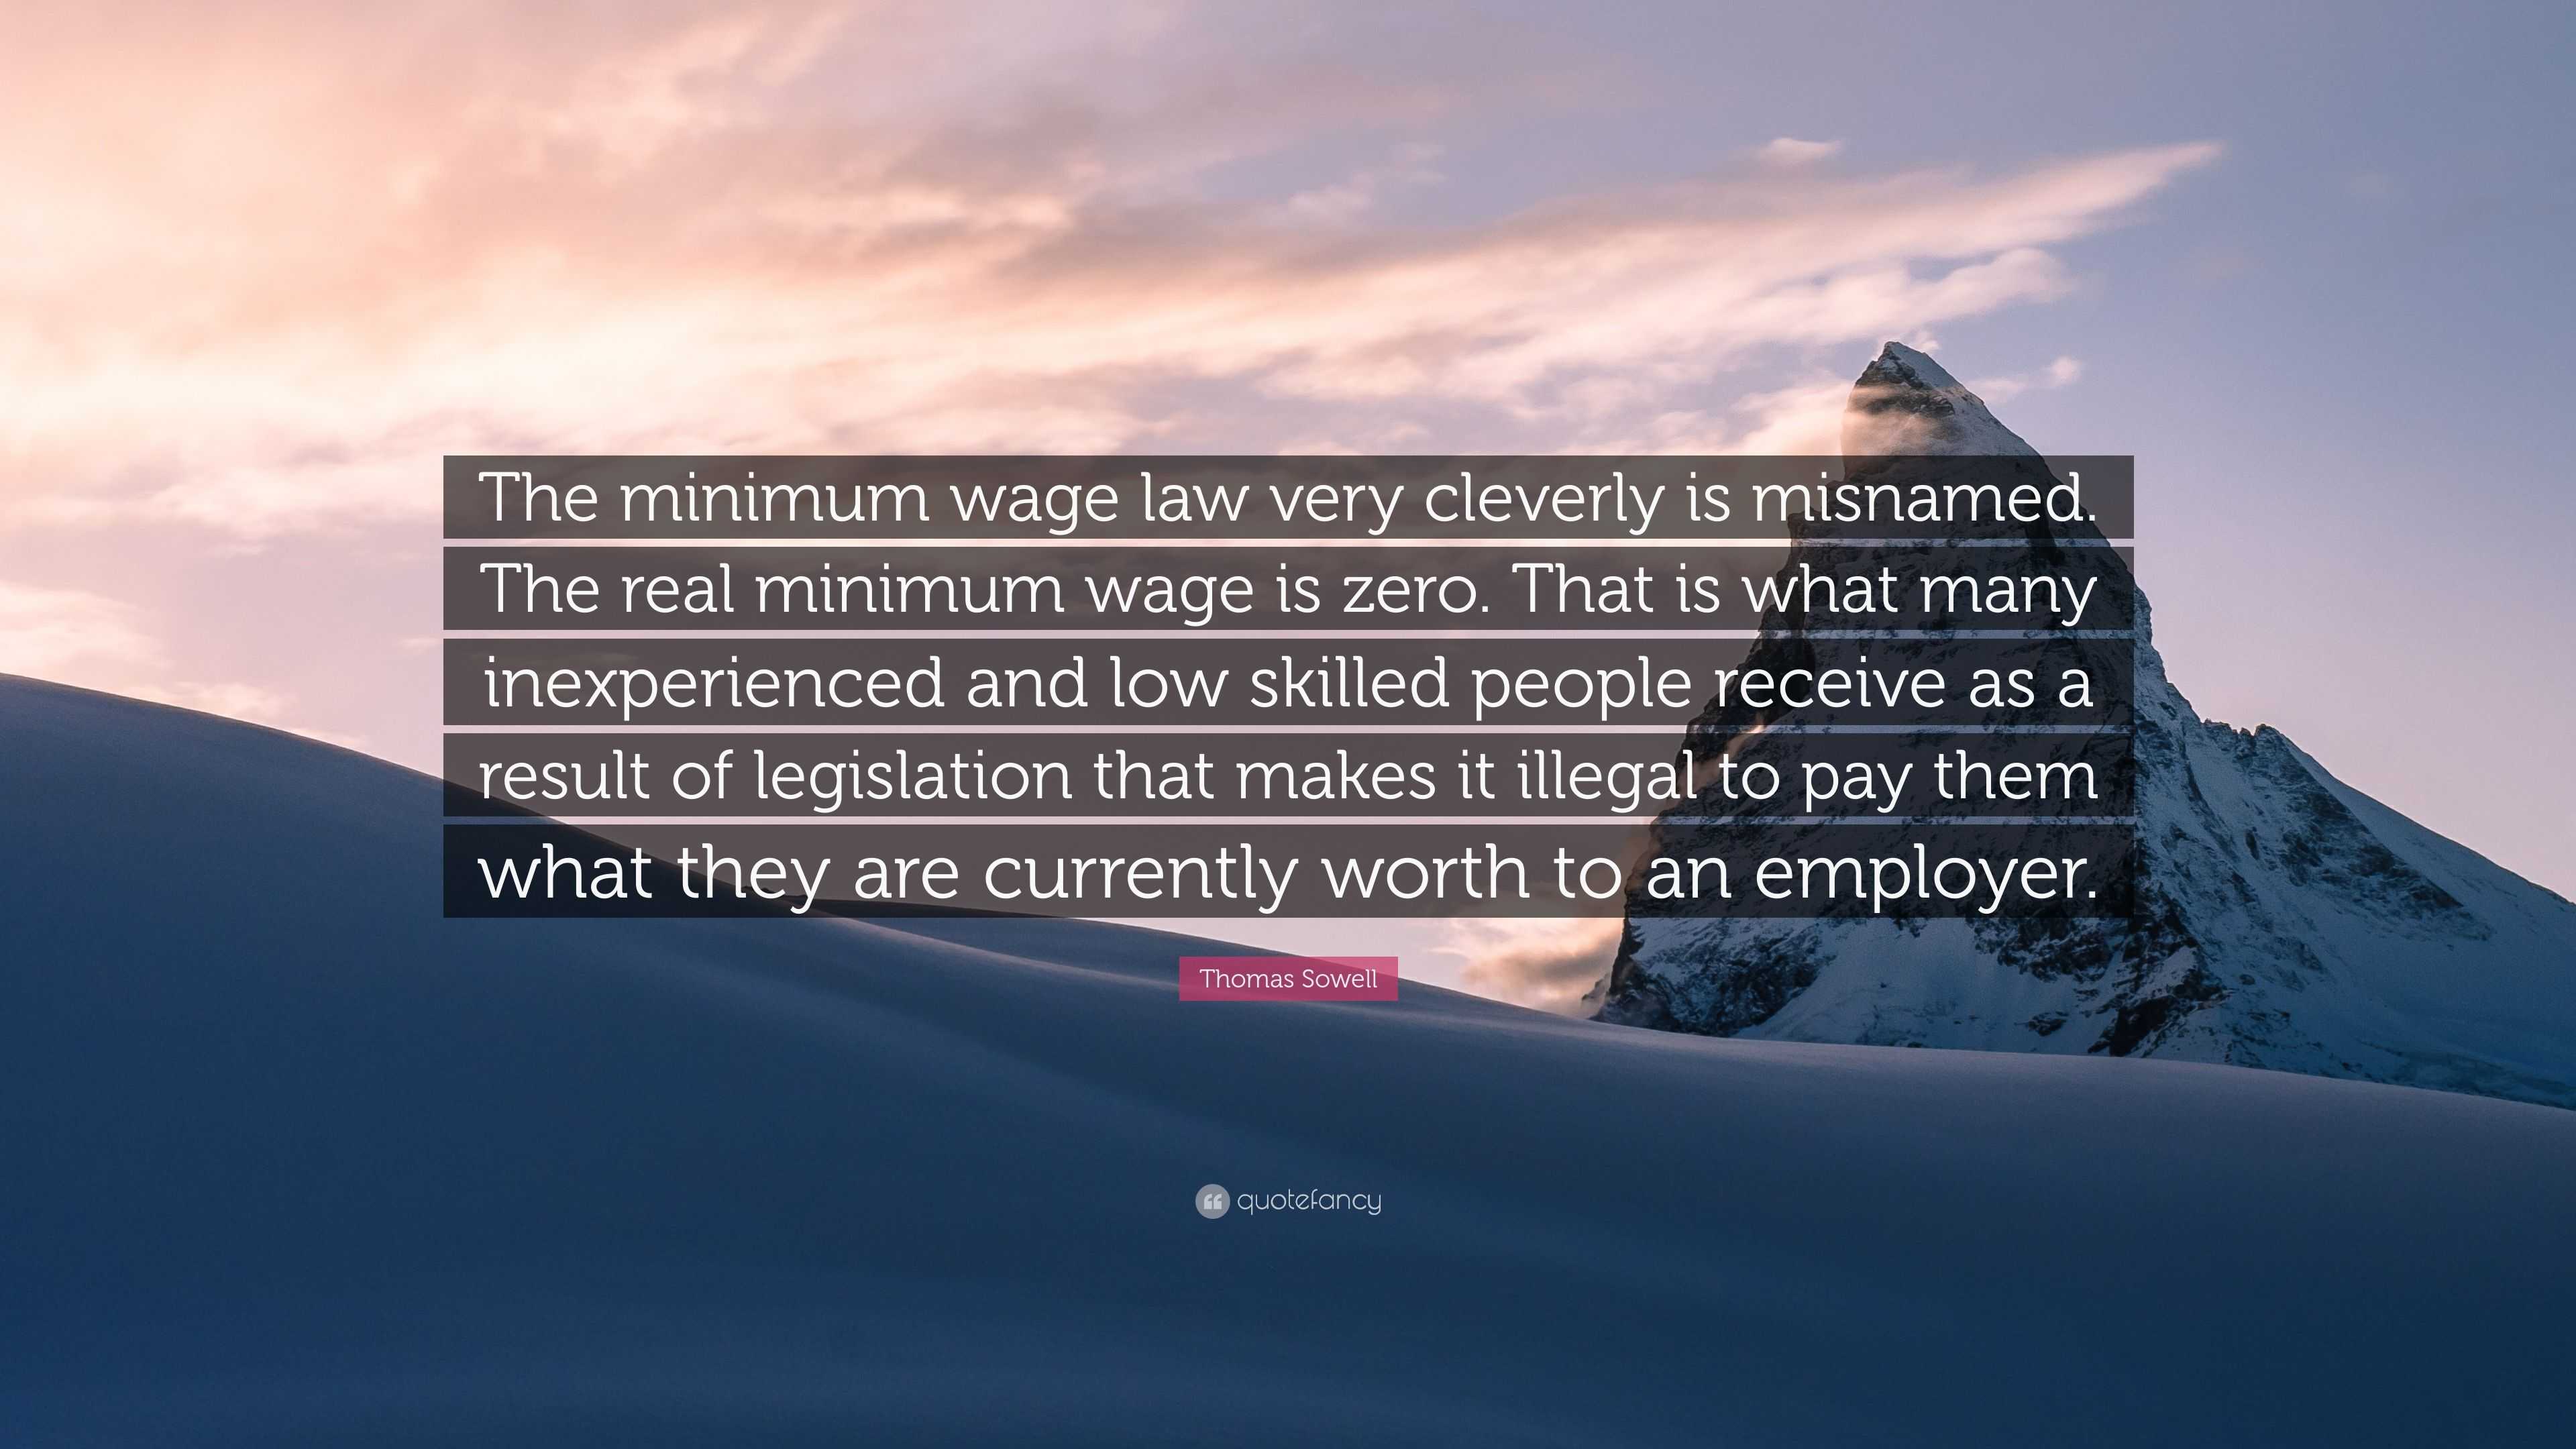 3798719-Thomas-Sowell-Quote-The-minimum-wage-law-very-cleverly-is-misnamed.jpg